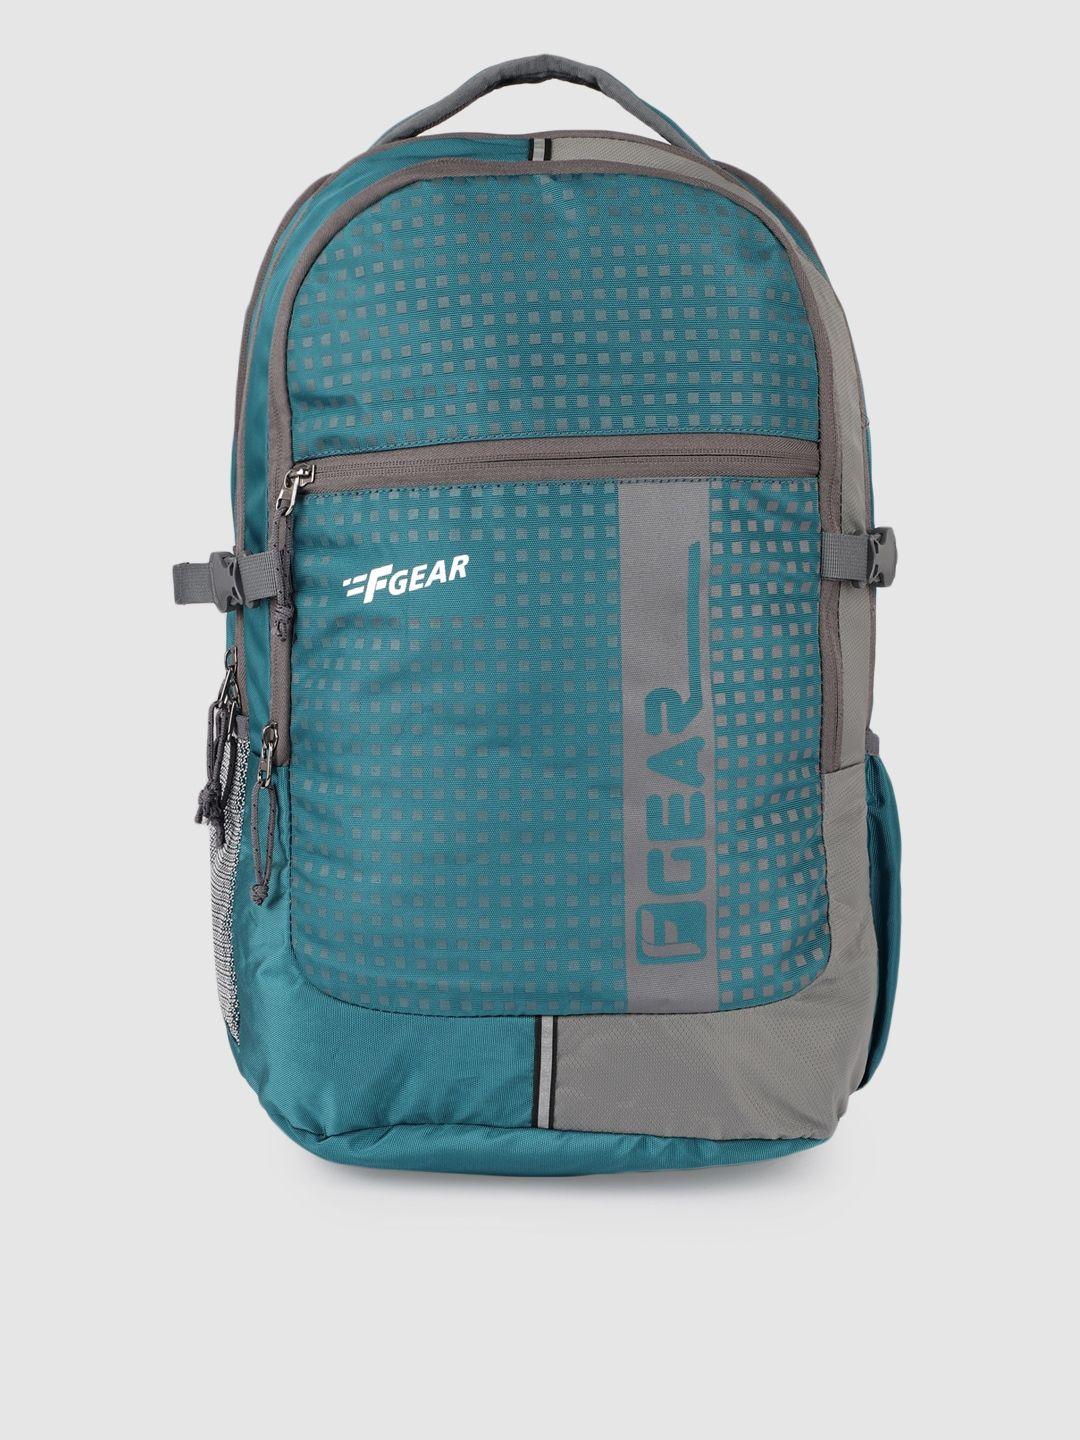 f-gear-unisex-blue-&-grey-graphic-backpack